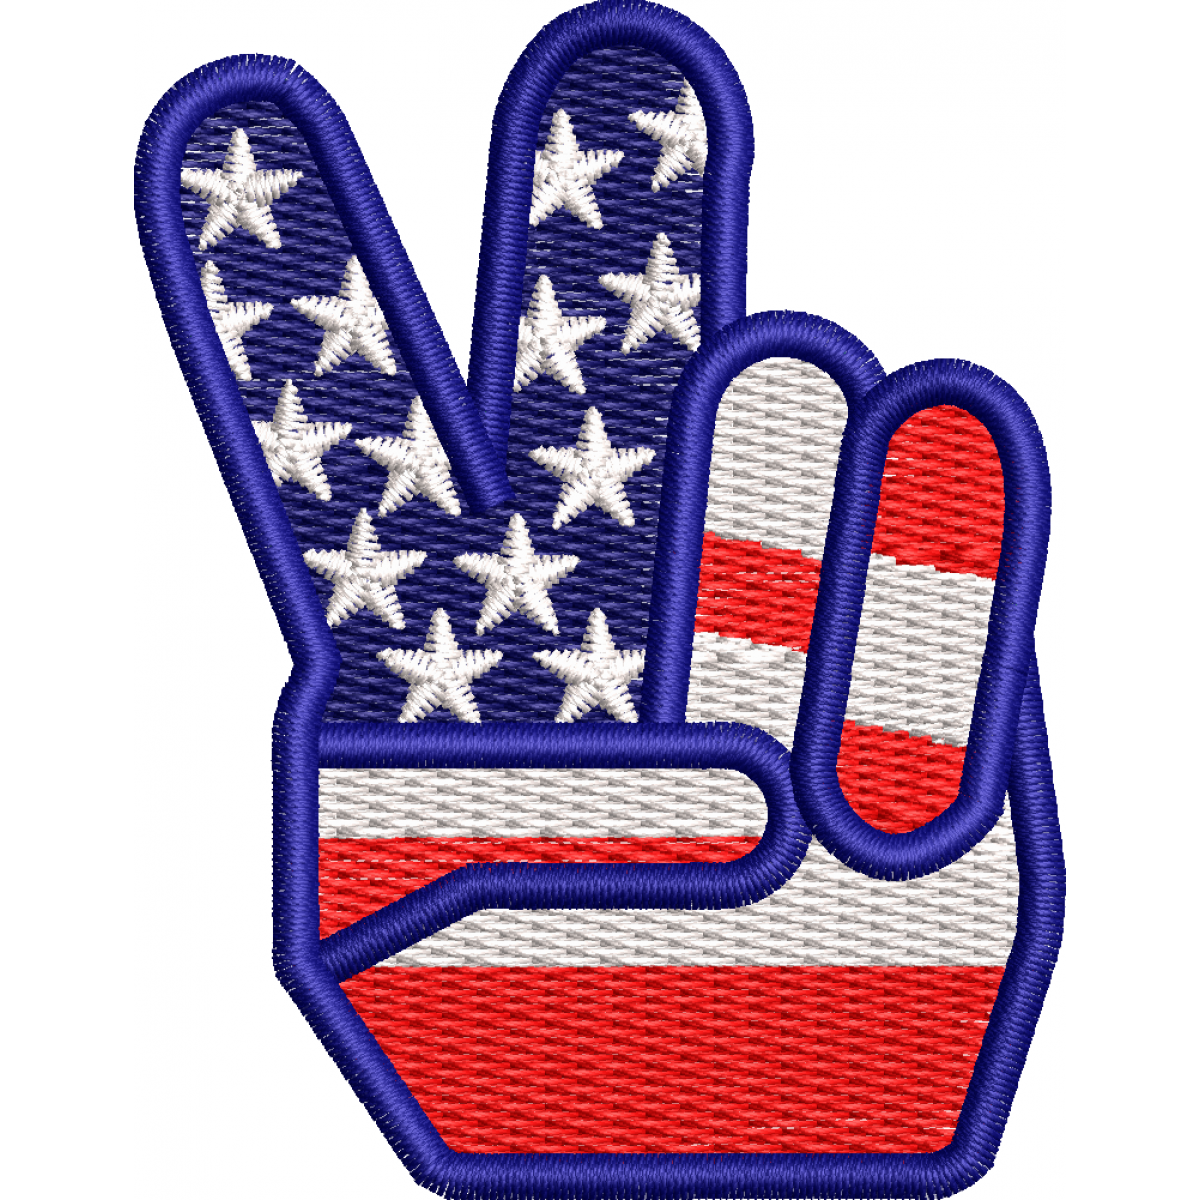 Hand-shaped American flag embroidery design 18f